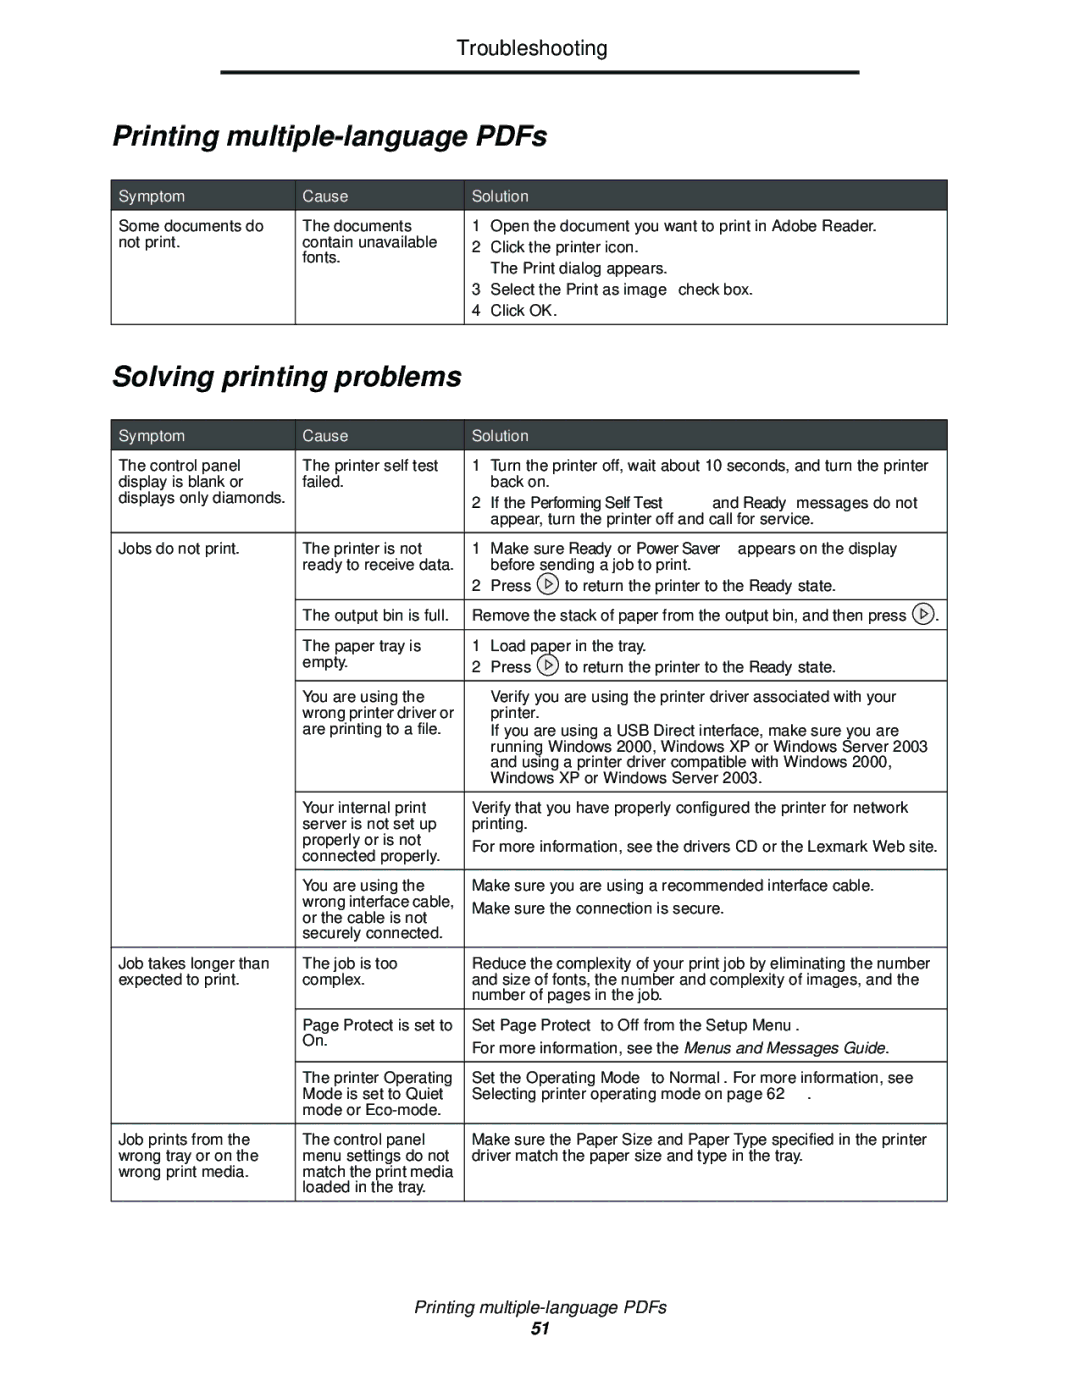 Lexmark E352DN Solving printing problems, Troubleshooting, Symptom Cause Solution, Selecting printer operating mode on 